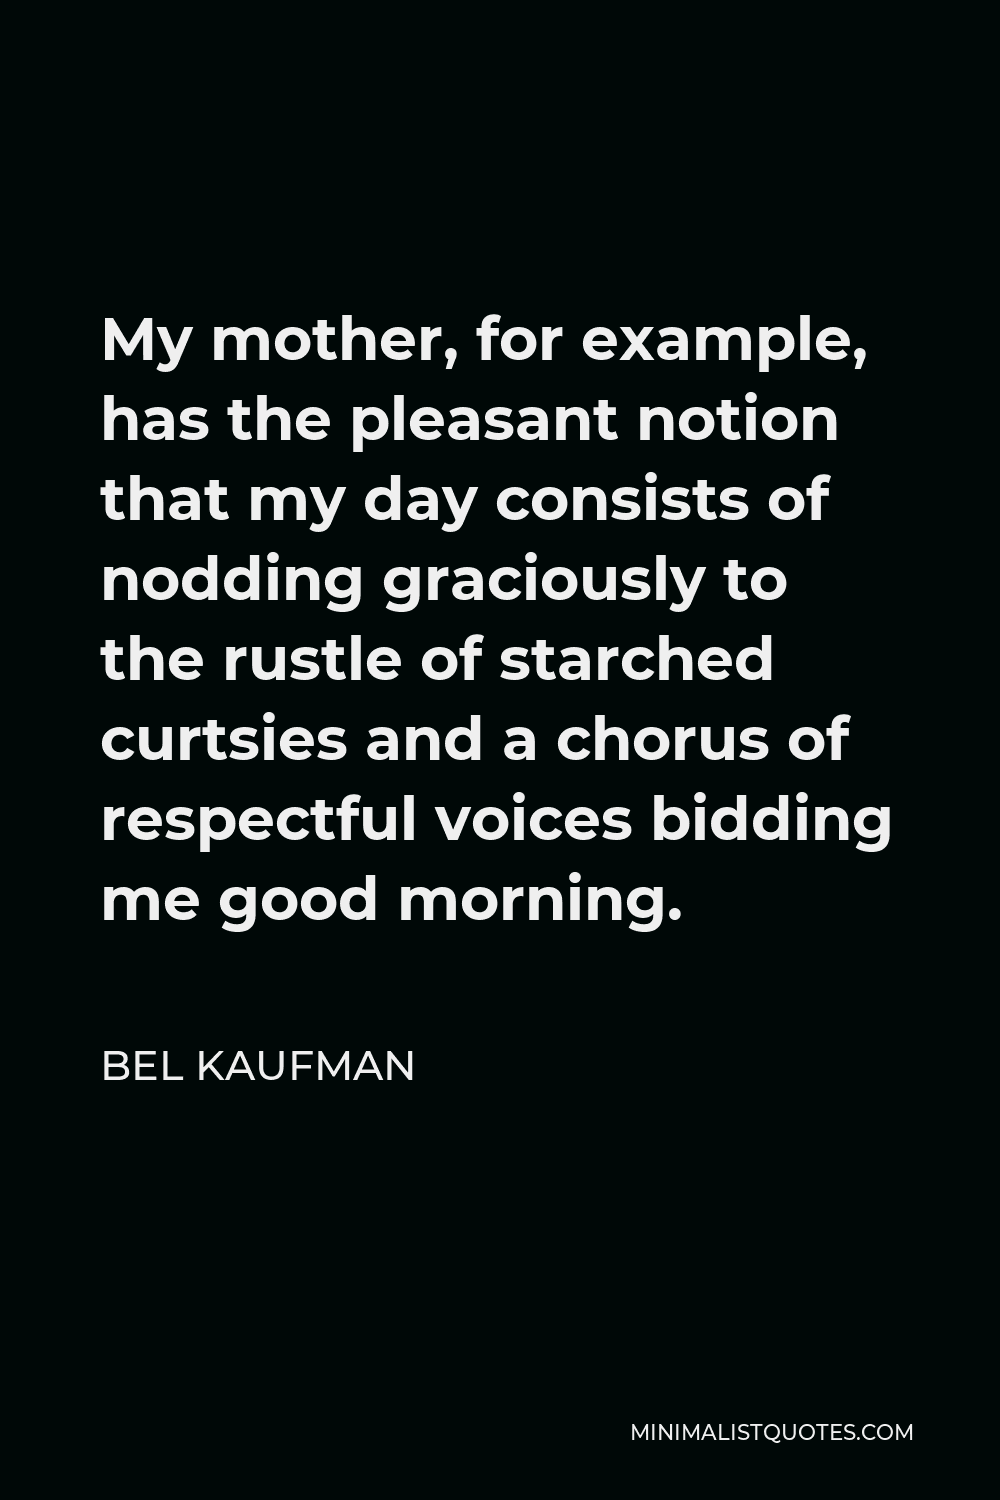 Bel Kaufman Quote - My mother, for example, has the pleasant notion that my day consists of nodding graciously to the rustle of starched curtsies and a chorus of respectful voices bidding me good morning.